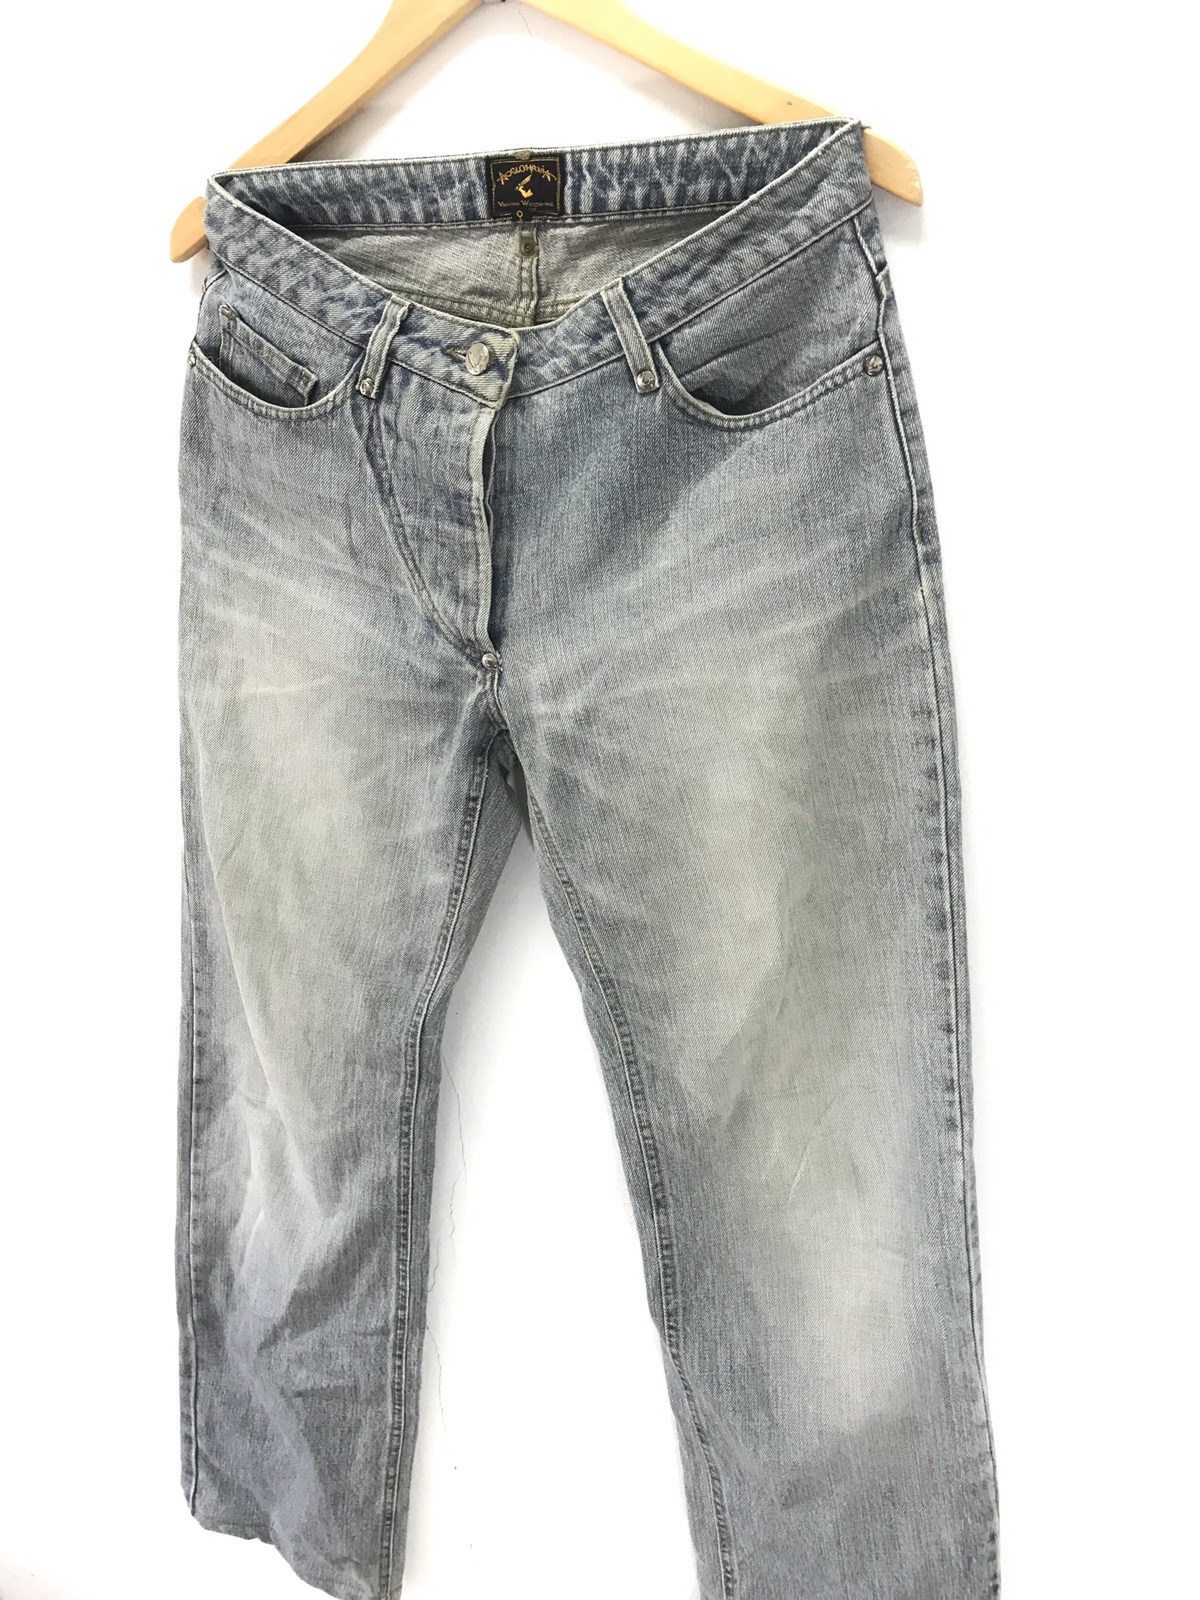 🔥Vivienne Westwood Anglomania Faded Session Jean - 6